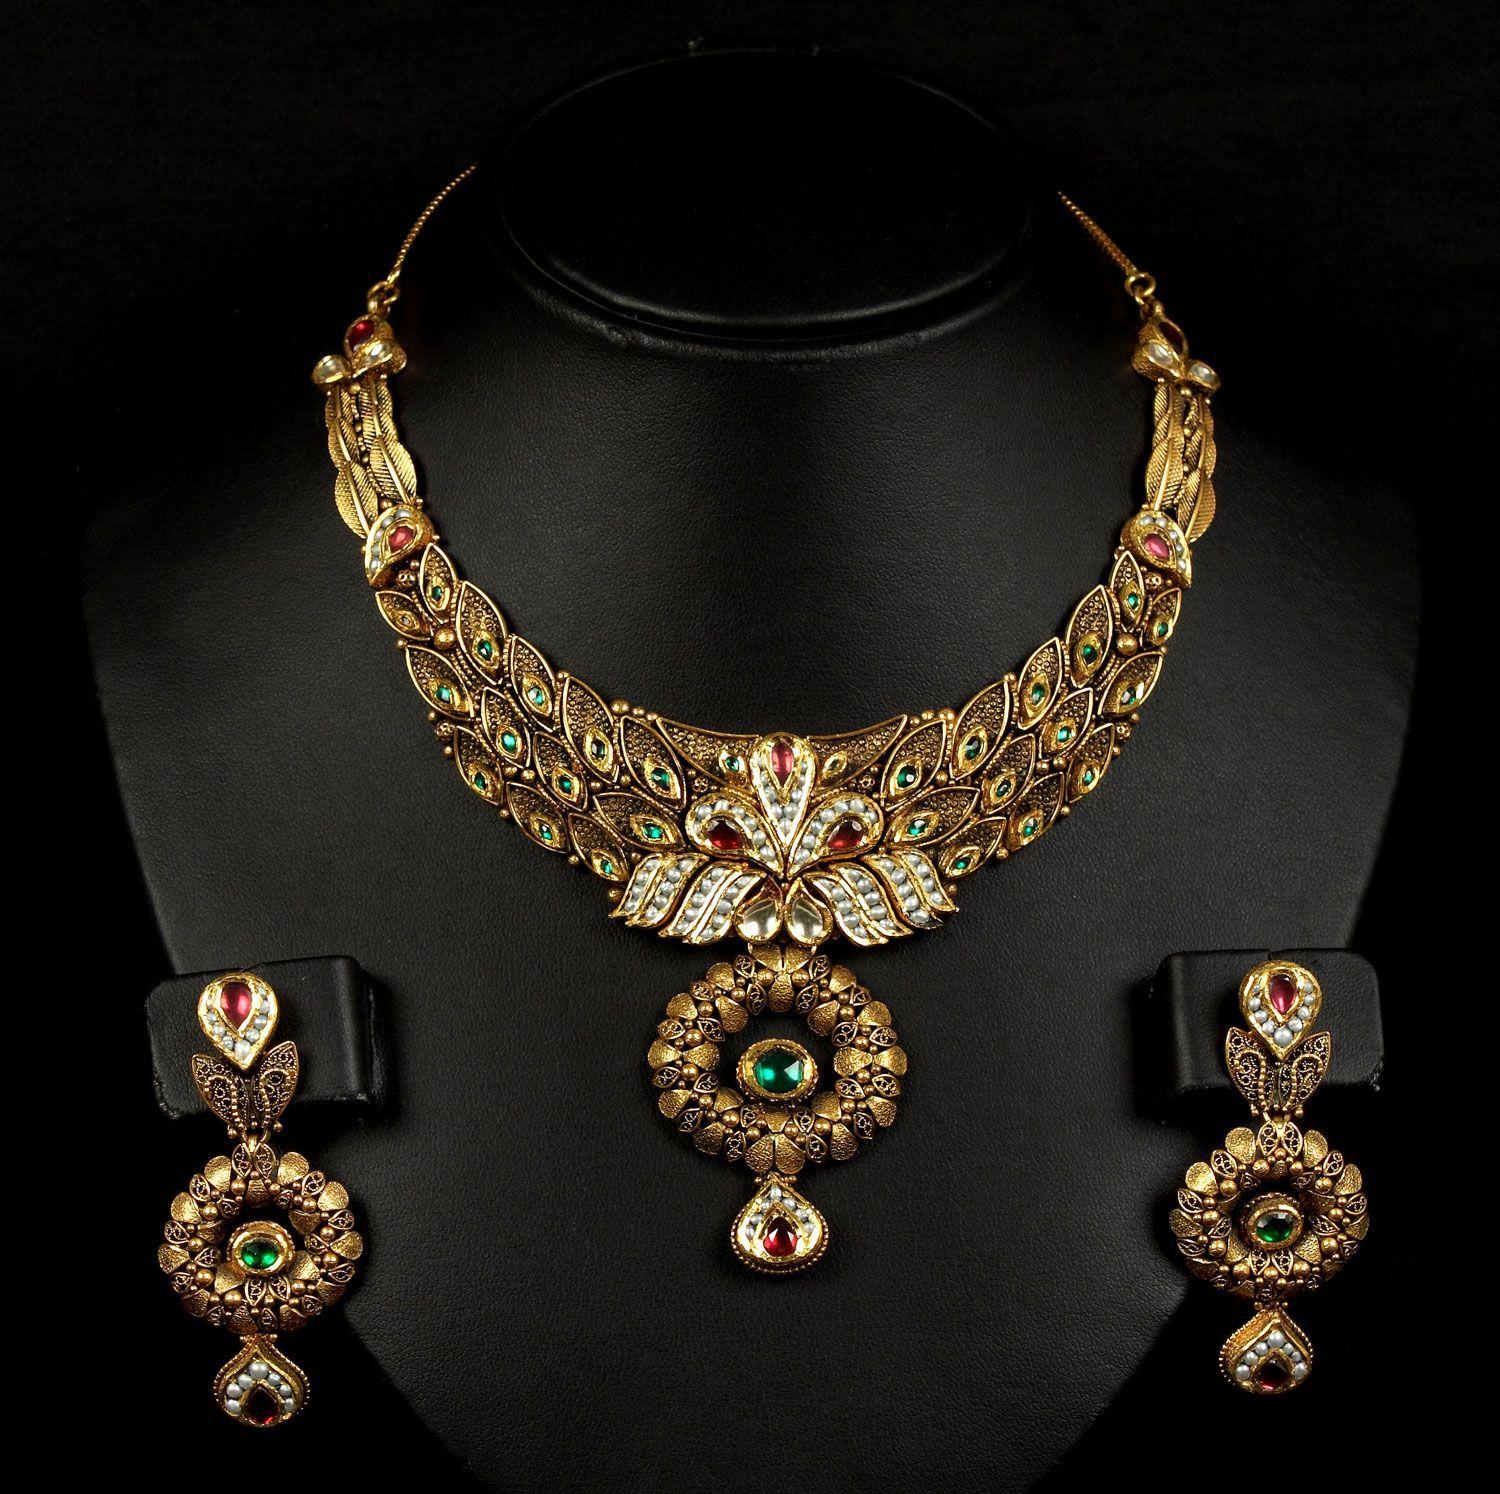 Indian Gold Jewellery Images  Free Download on Freepik